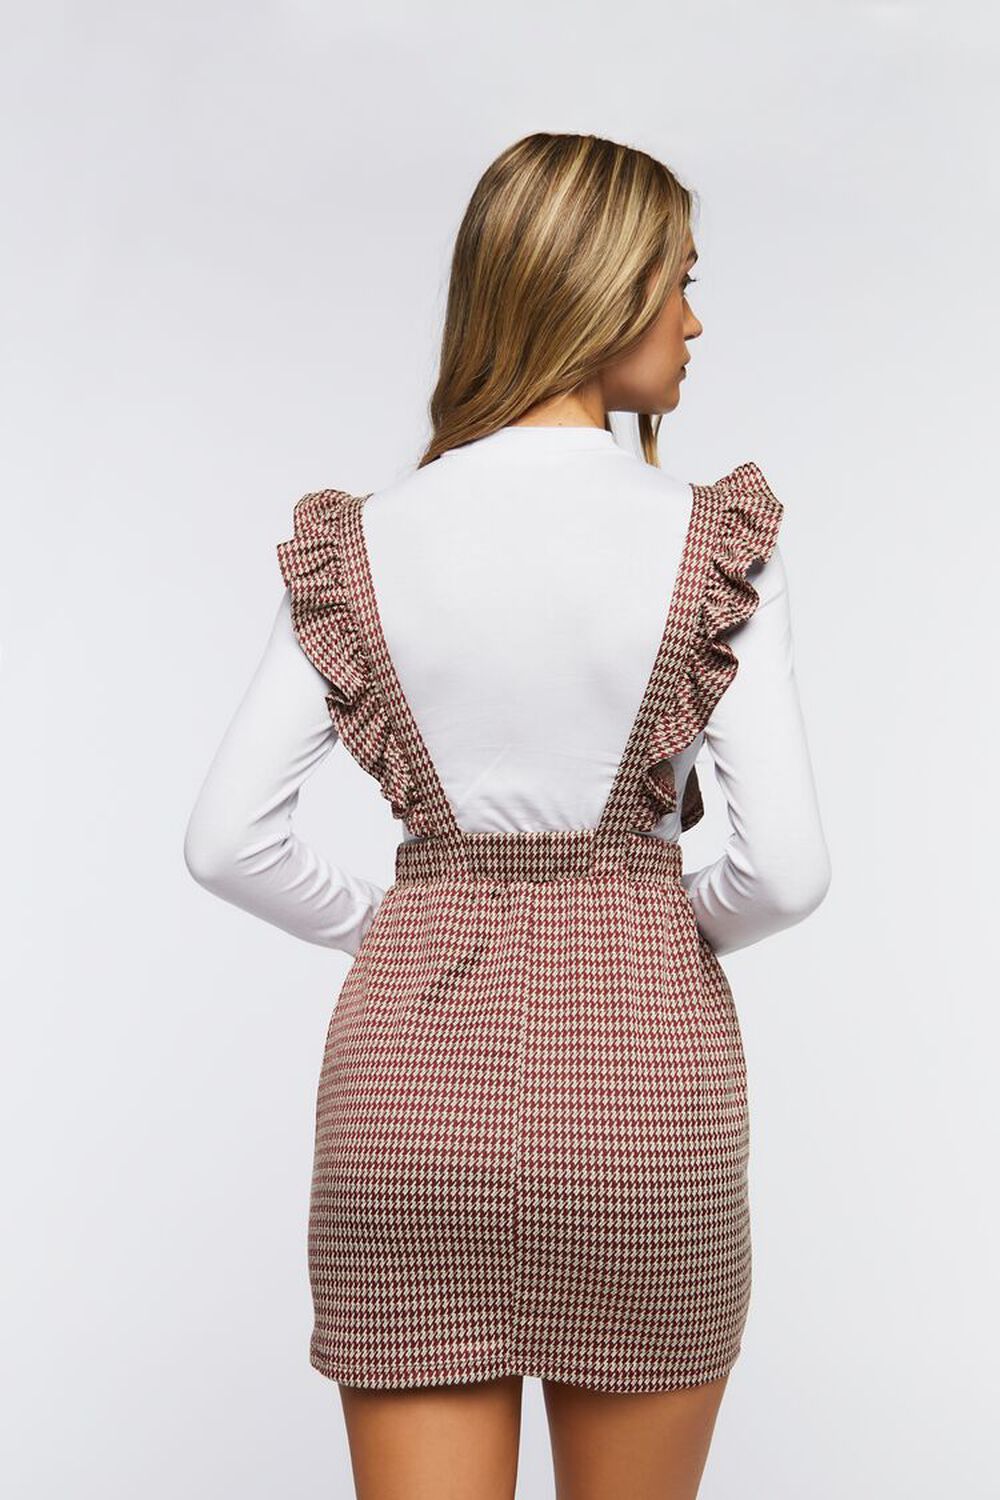 WHITE/MULTI Houndstooth Combo Pinafore Dress, image 3